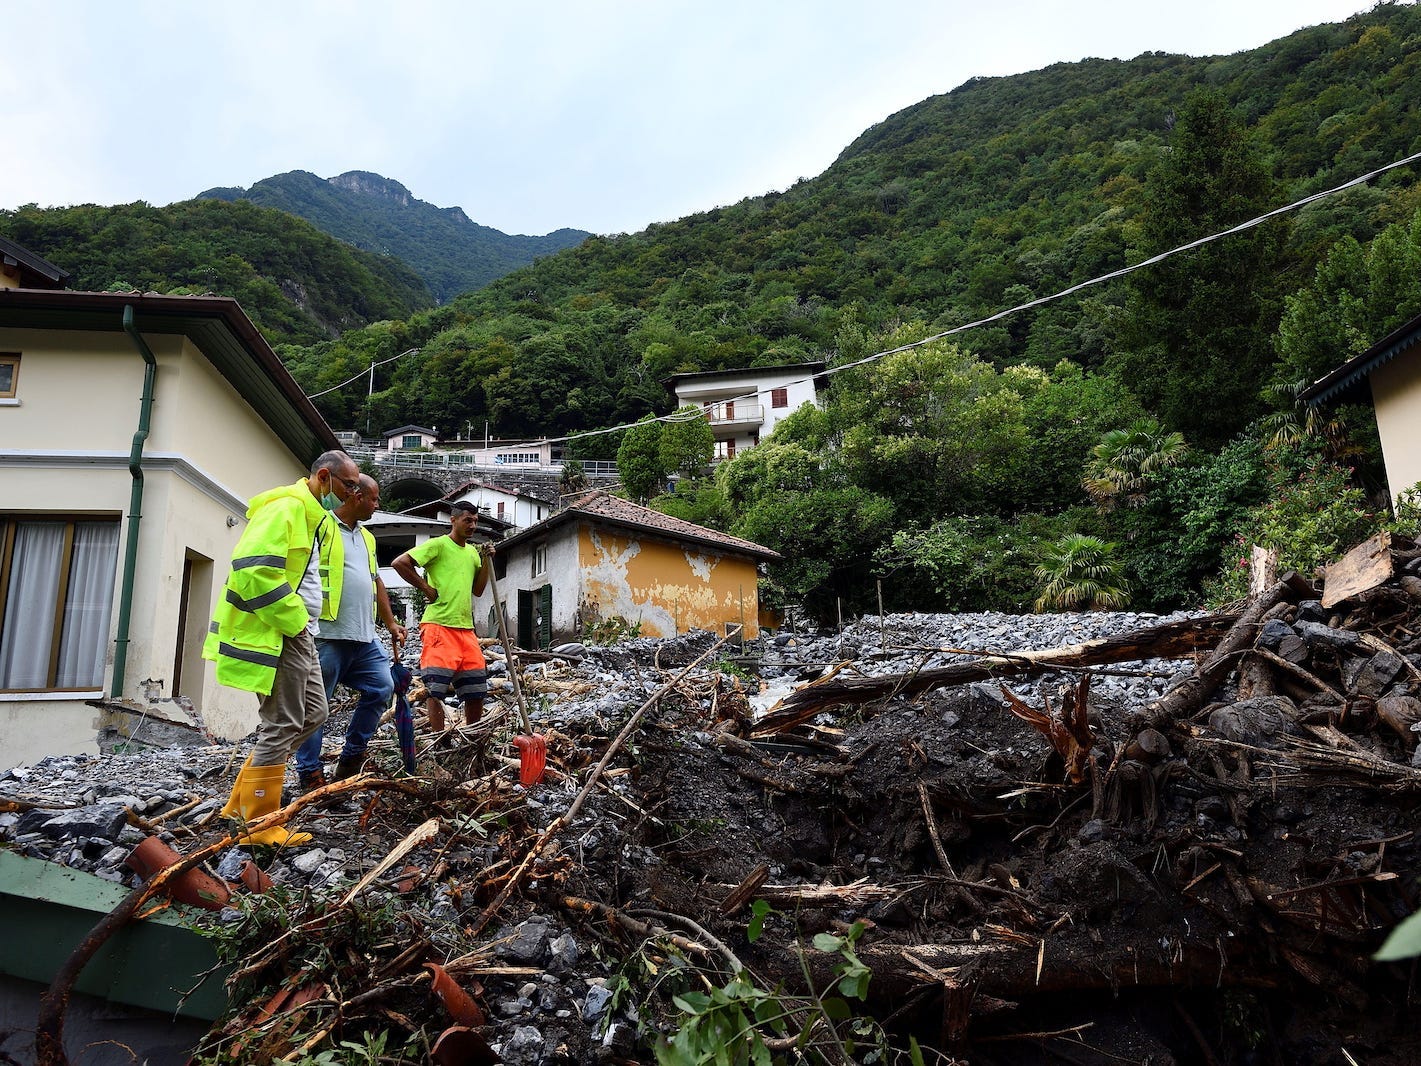 People stand in an area where a landslide has destroyed several houses after heavy rain caused flooding in towns surrounding Lake Como in northern Italy, in Laglio, Italy.